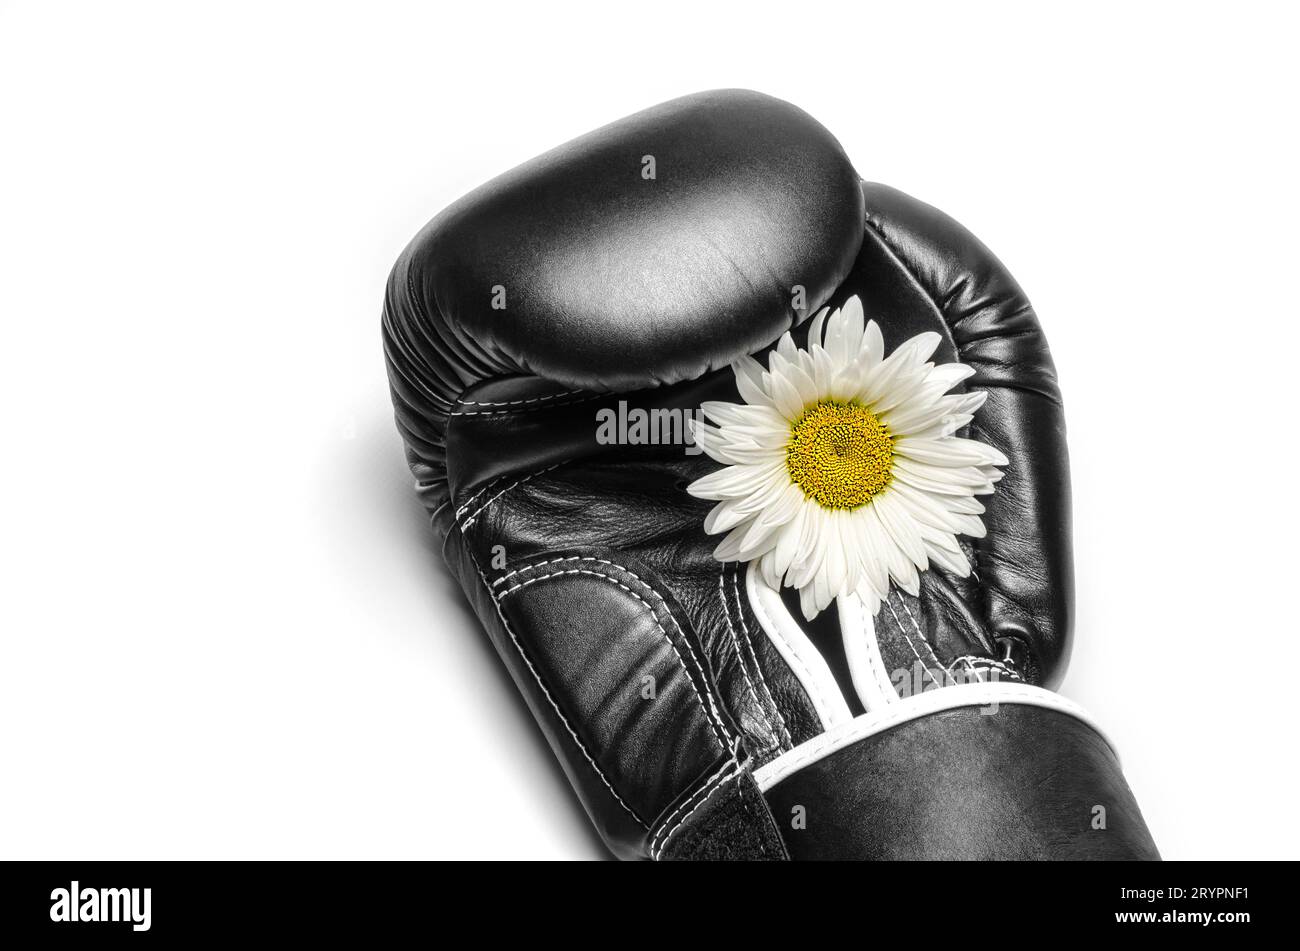 Boxing glove with a large chamomile flower close up Stock Photo